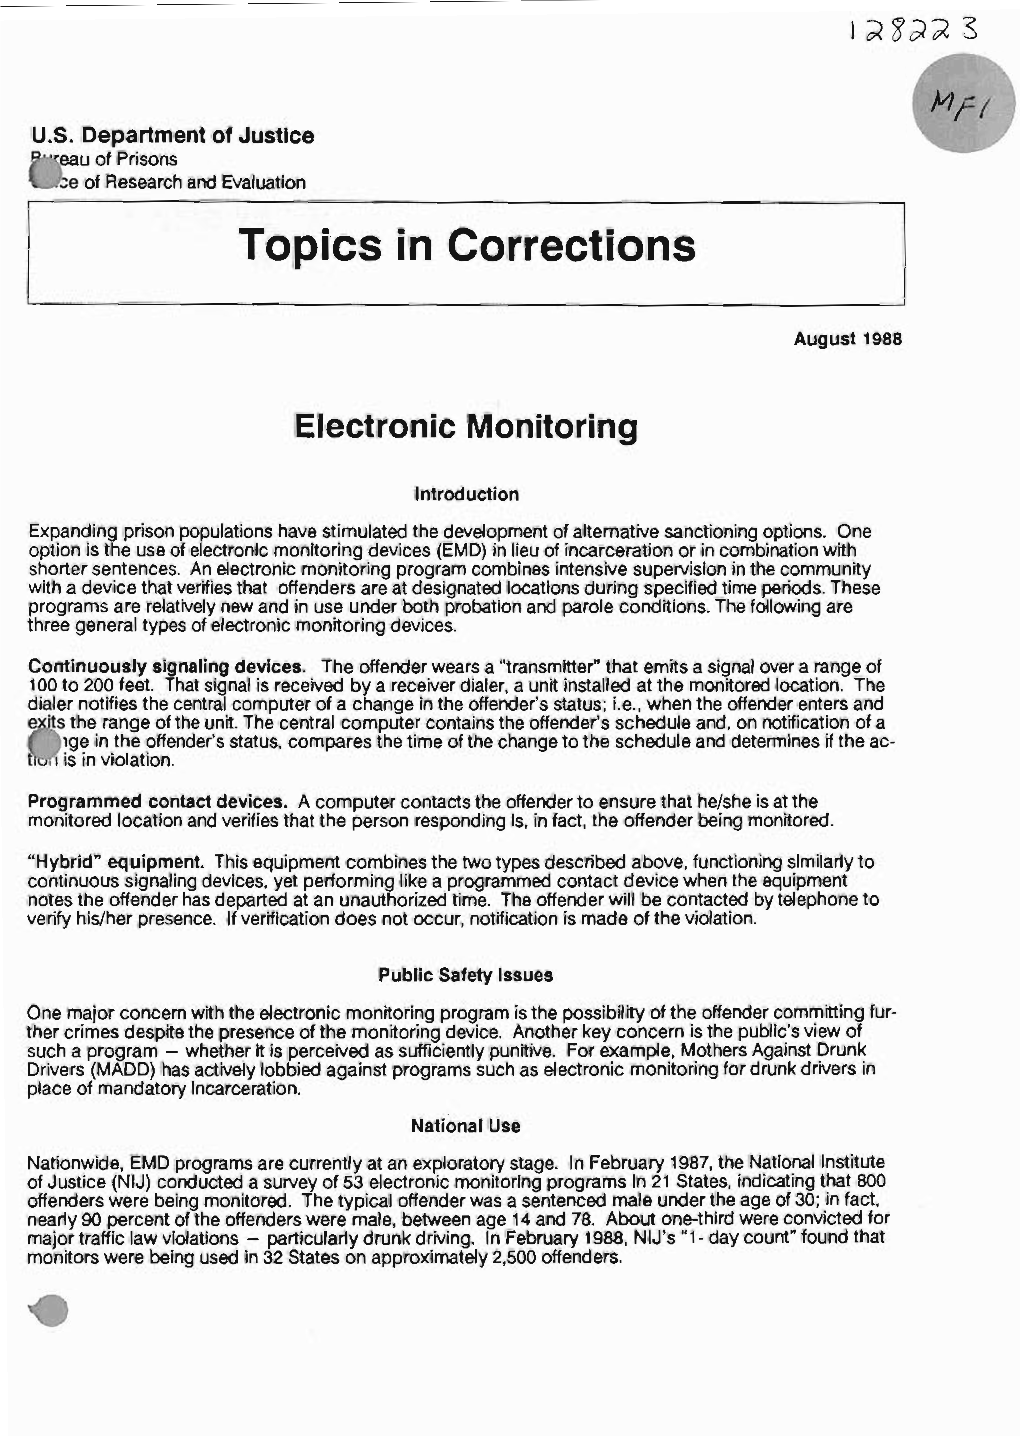 Topics in Corrections: Electronic Monitoring